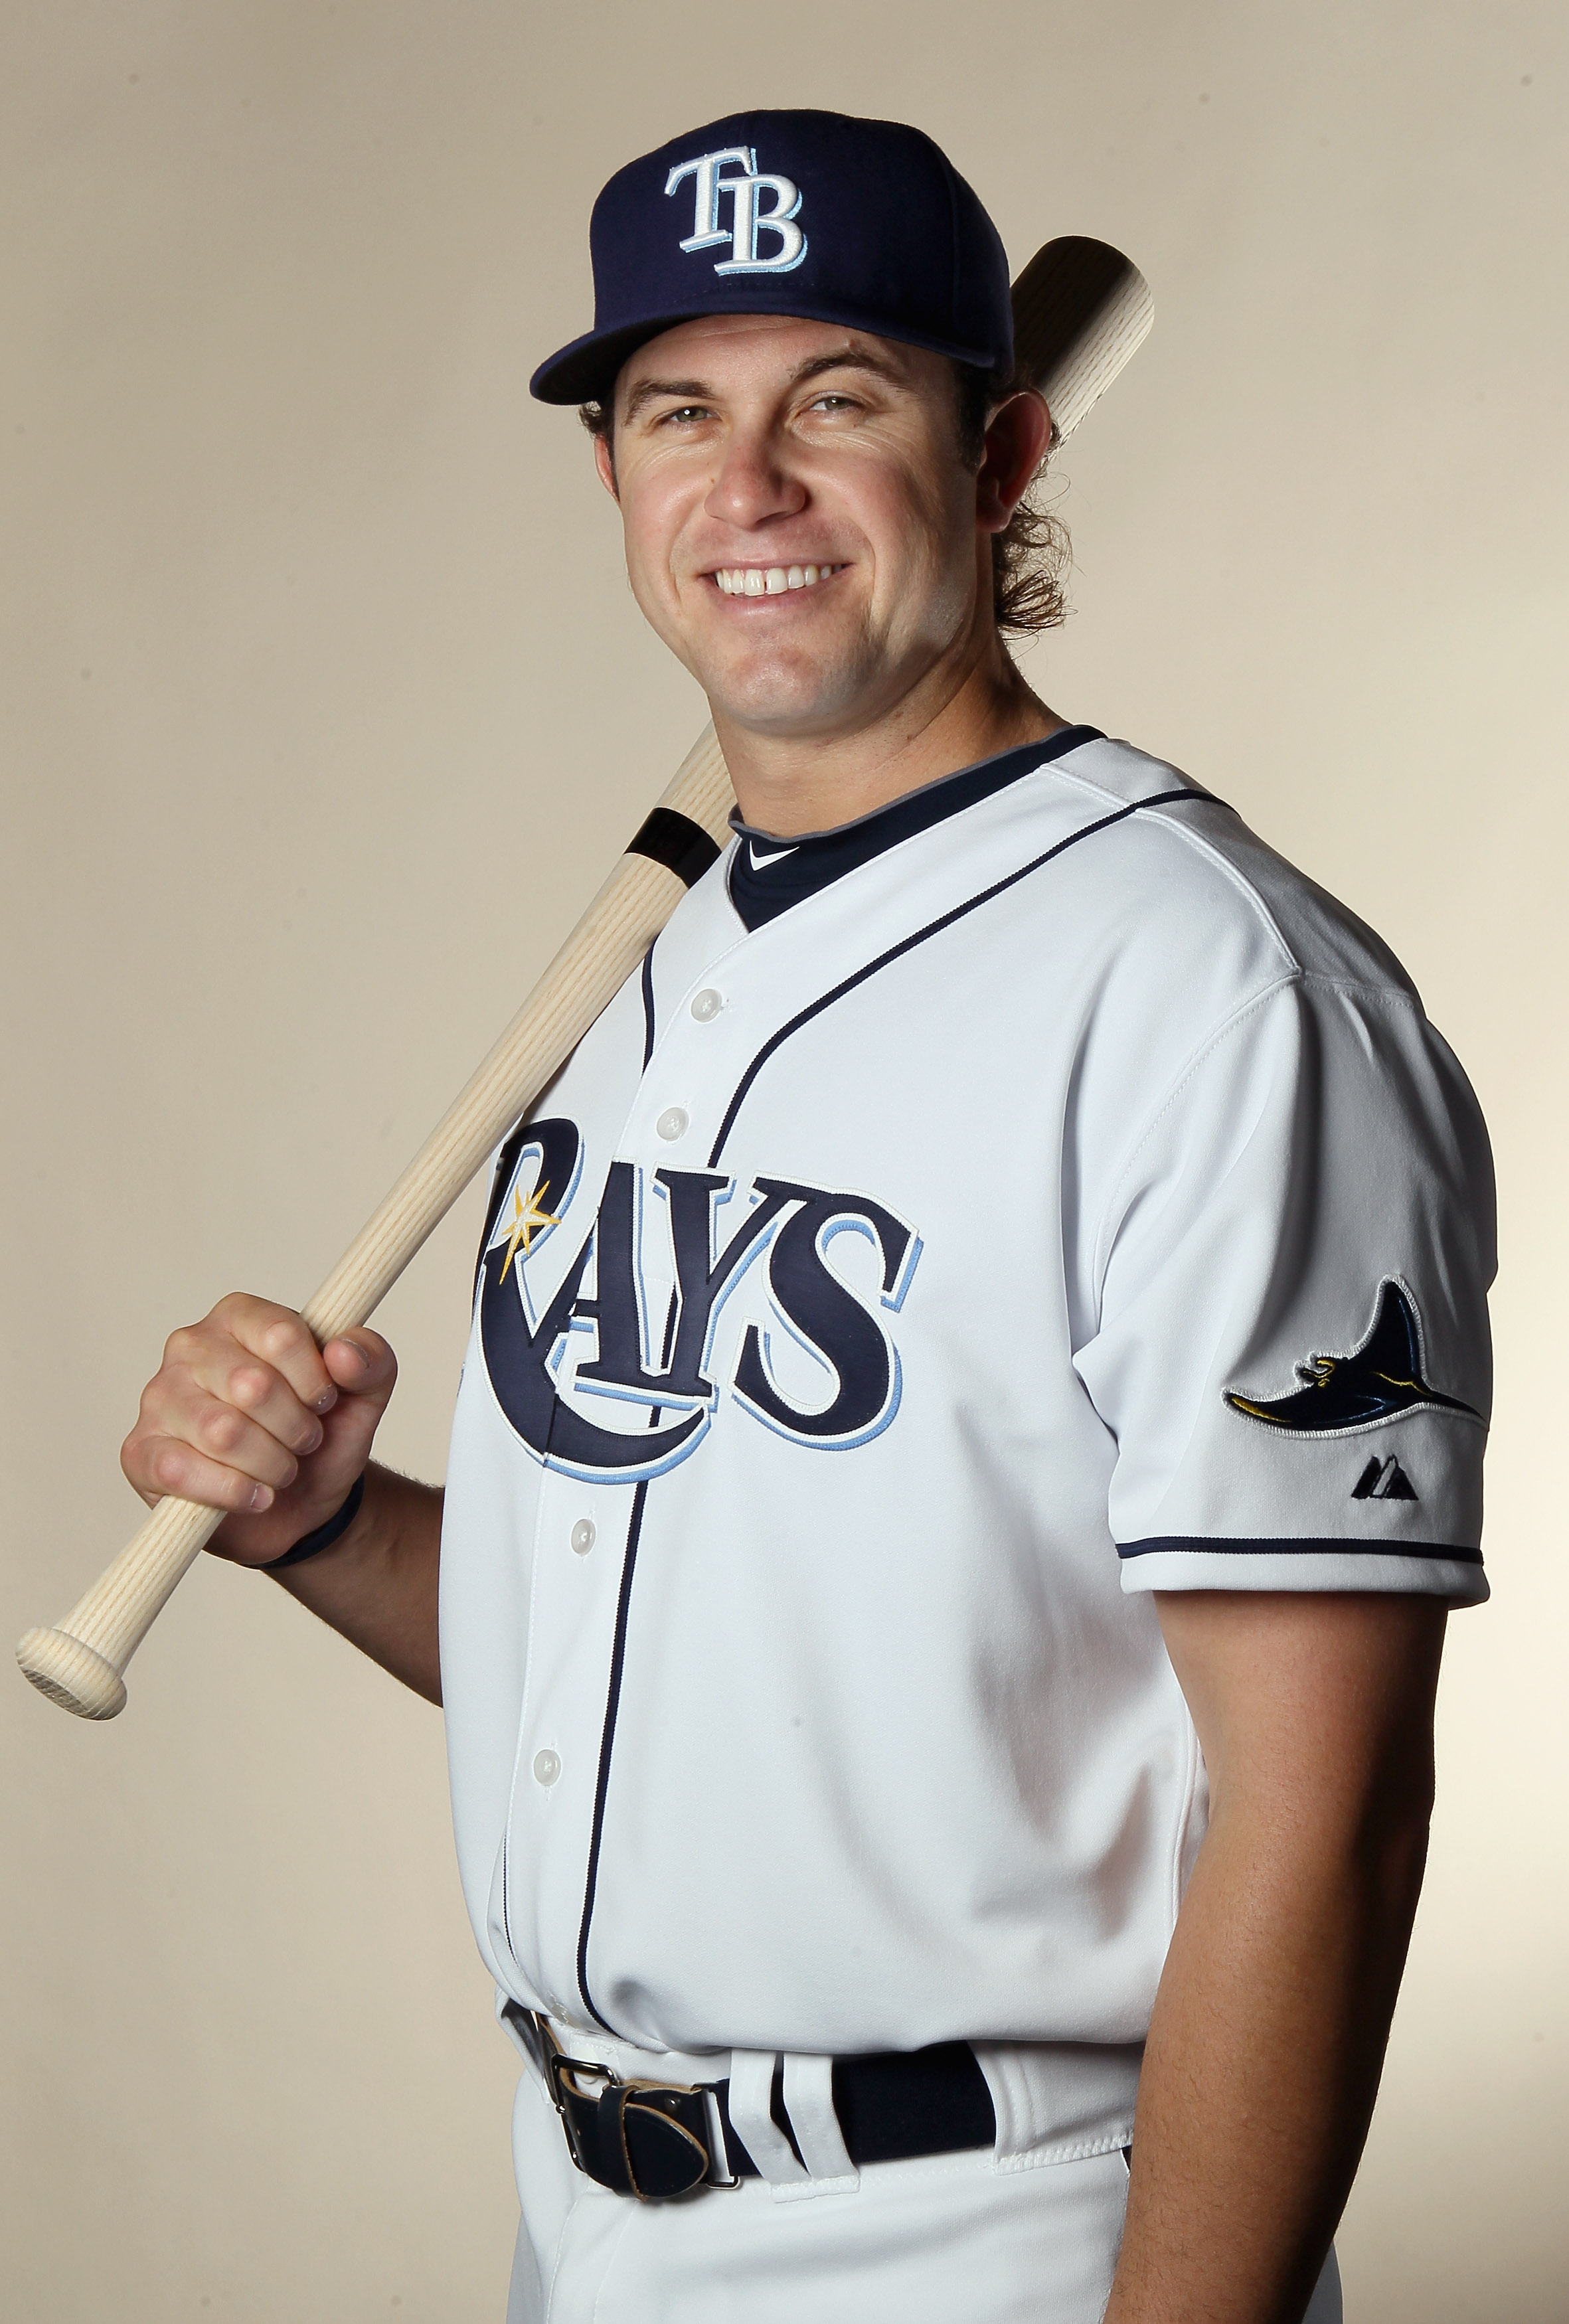 Evan Longoria of the Tampa Bay Rays poses for a photo during Spring News  Photo - Getty Images